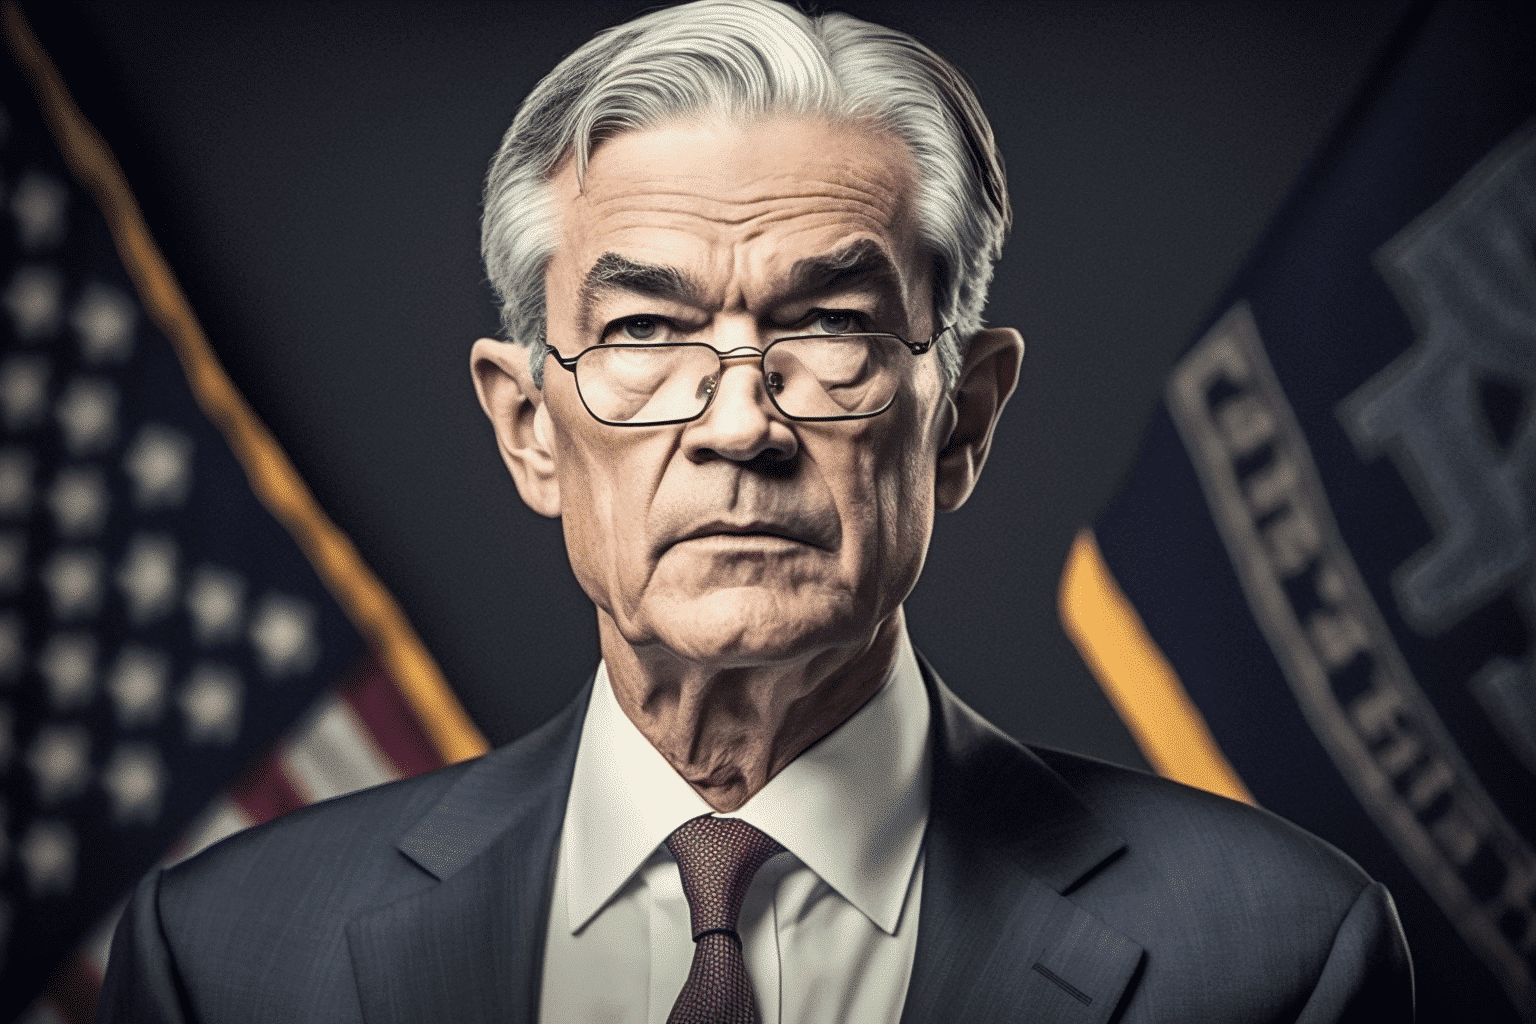 powell-navigates-inflation-pressures-in-congressional-hearings